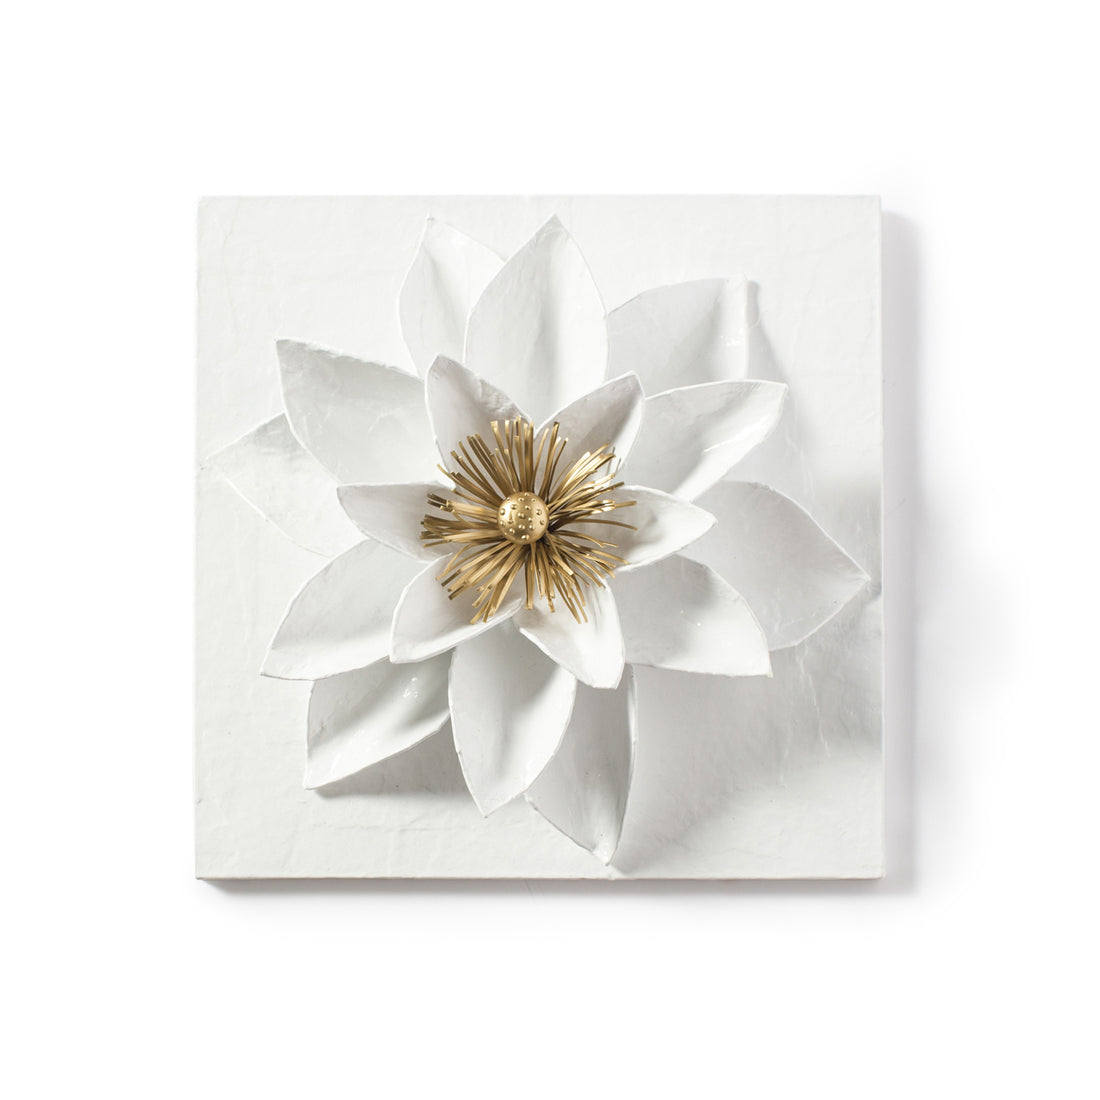 Lotus Flower Wall Tile, handmade in Mexico